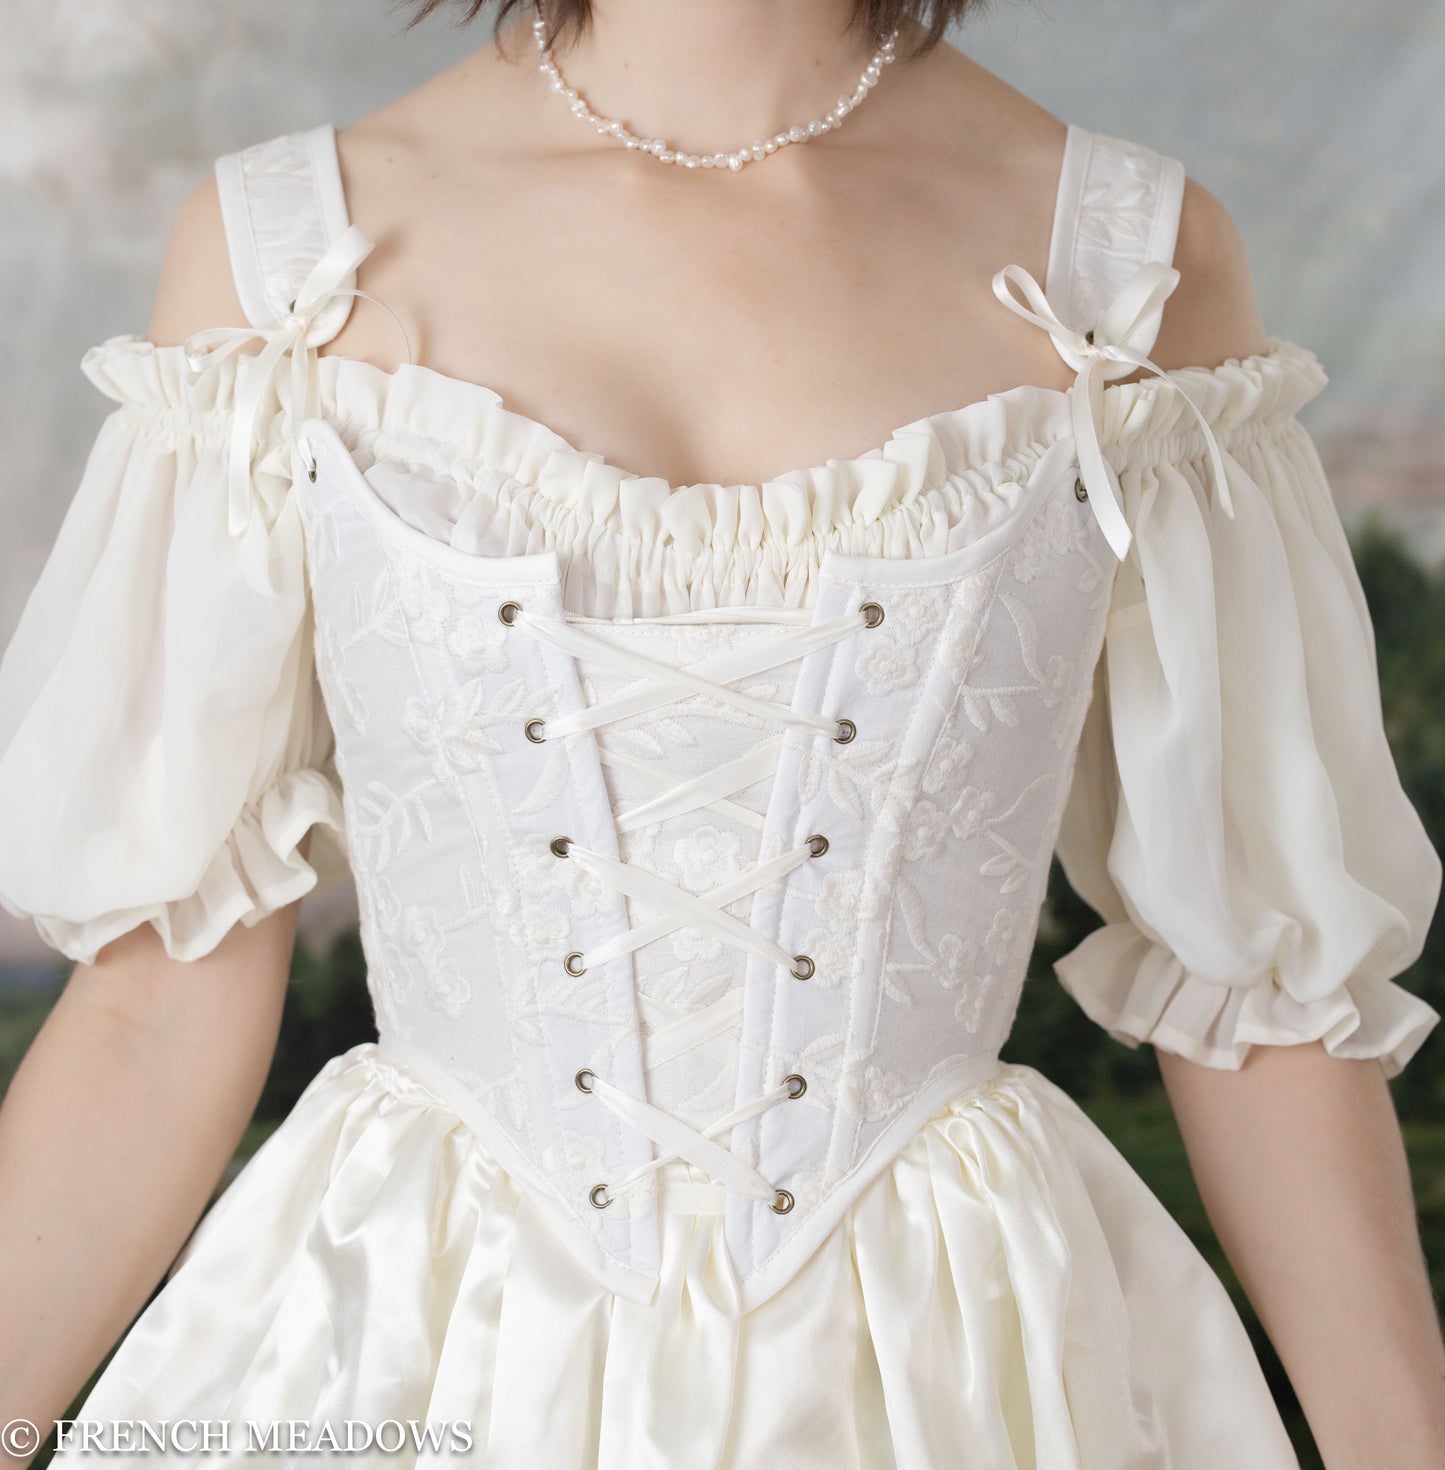 Renaissance Corset Bodice Stays in Ivory Beige Embroidered Paisley